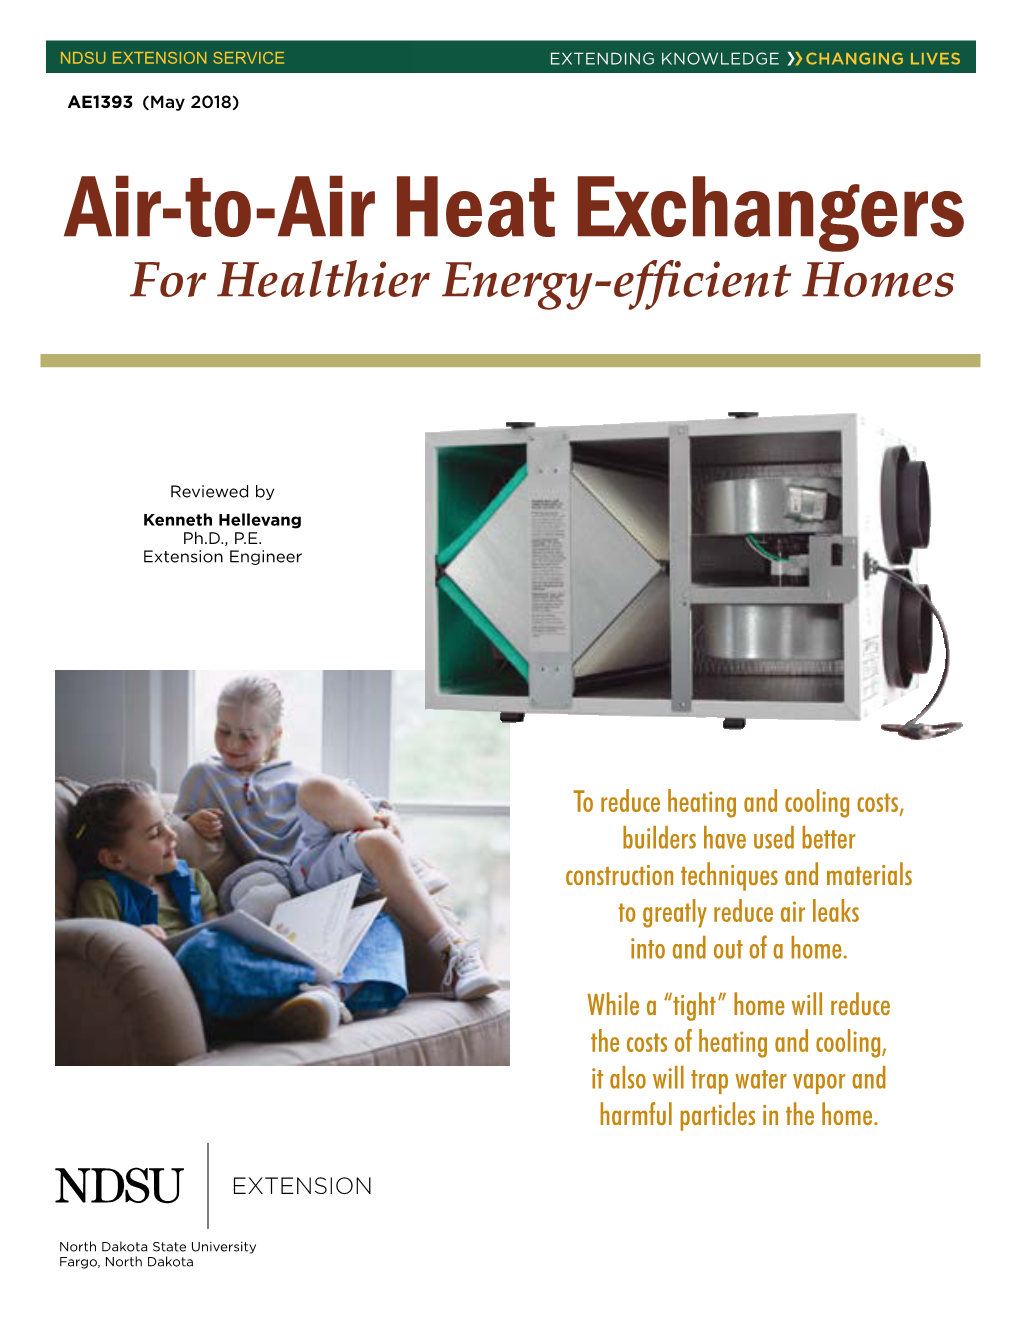 Air-To-Air Heat Exchangers for Healthier Energy-Efficient Homes